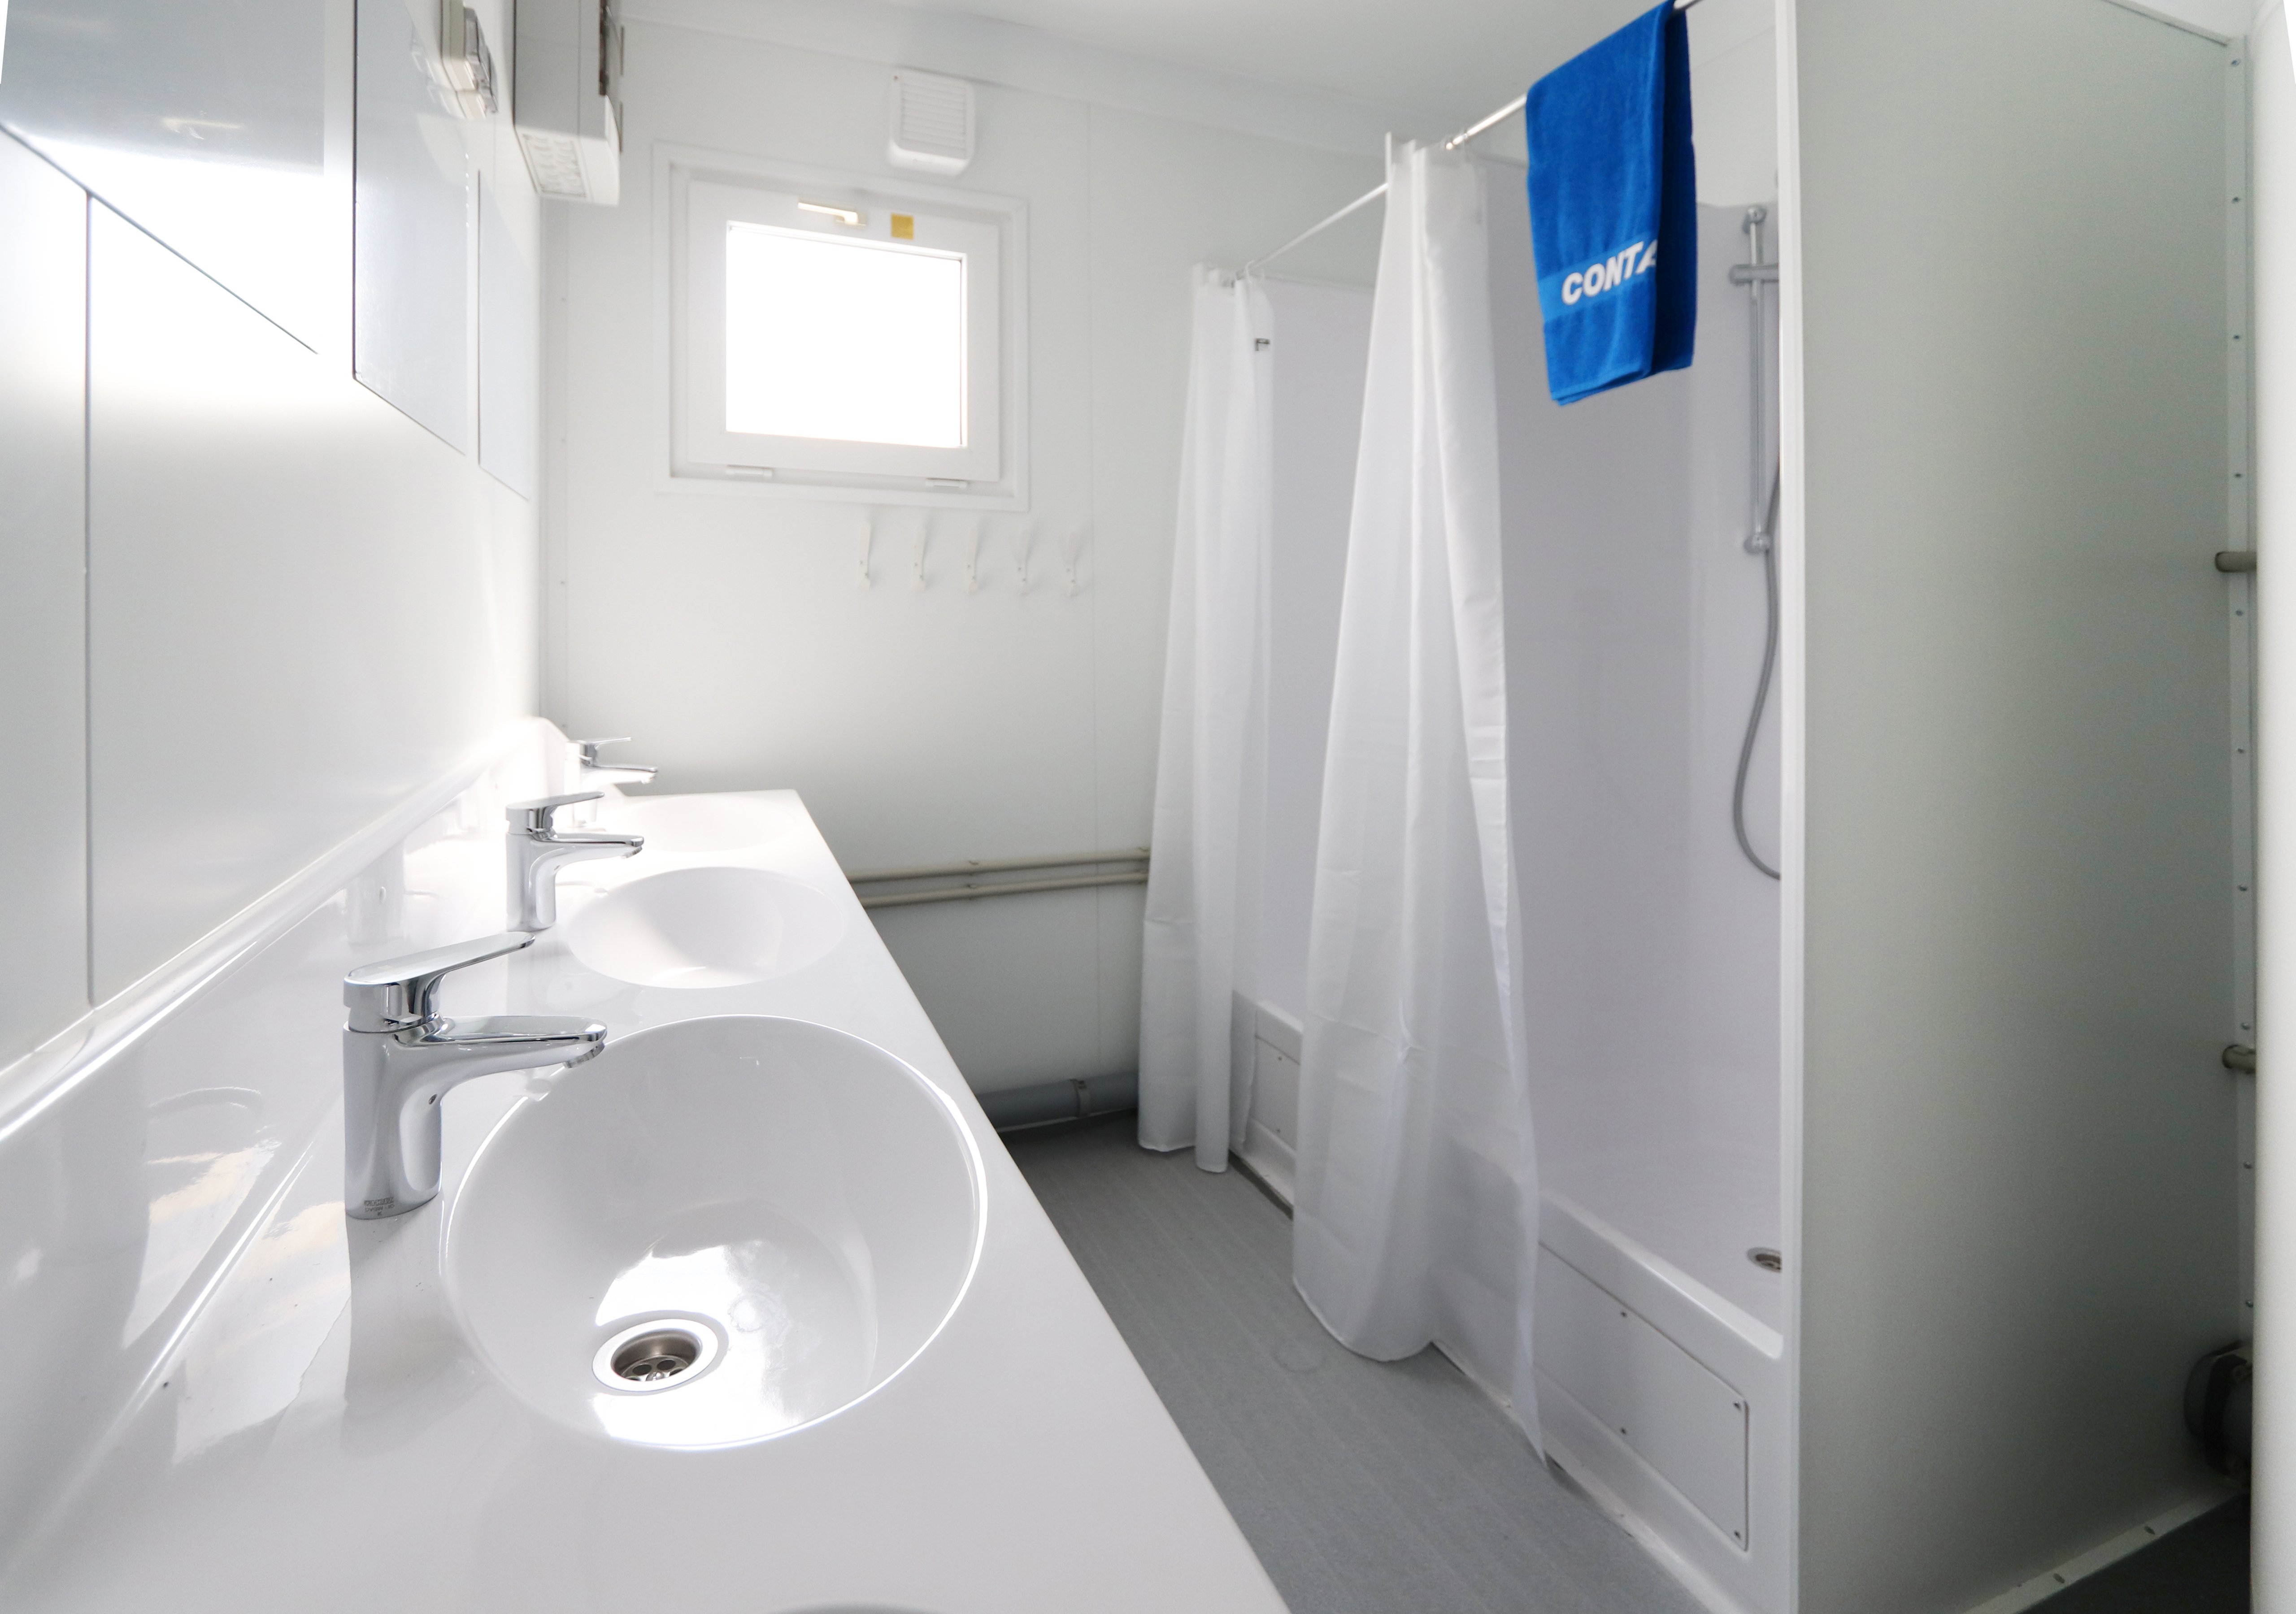 Rent a shower cabin and provide comfort and hygiene